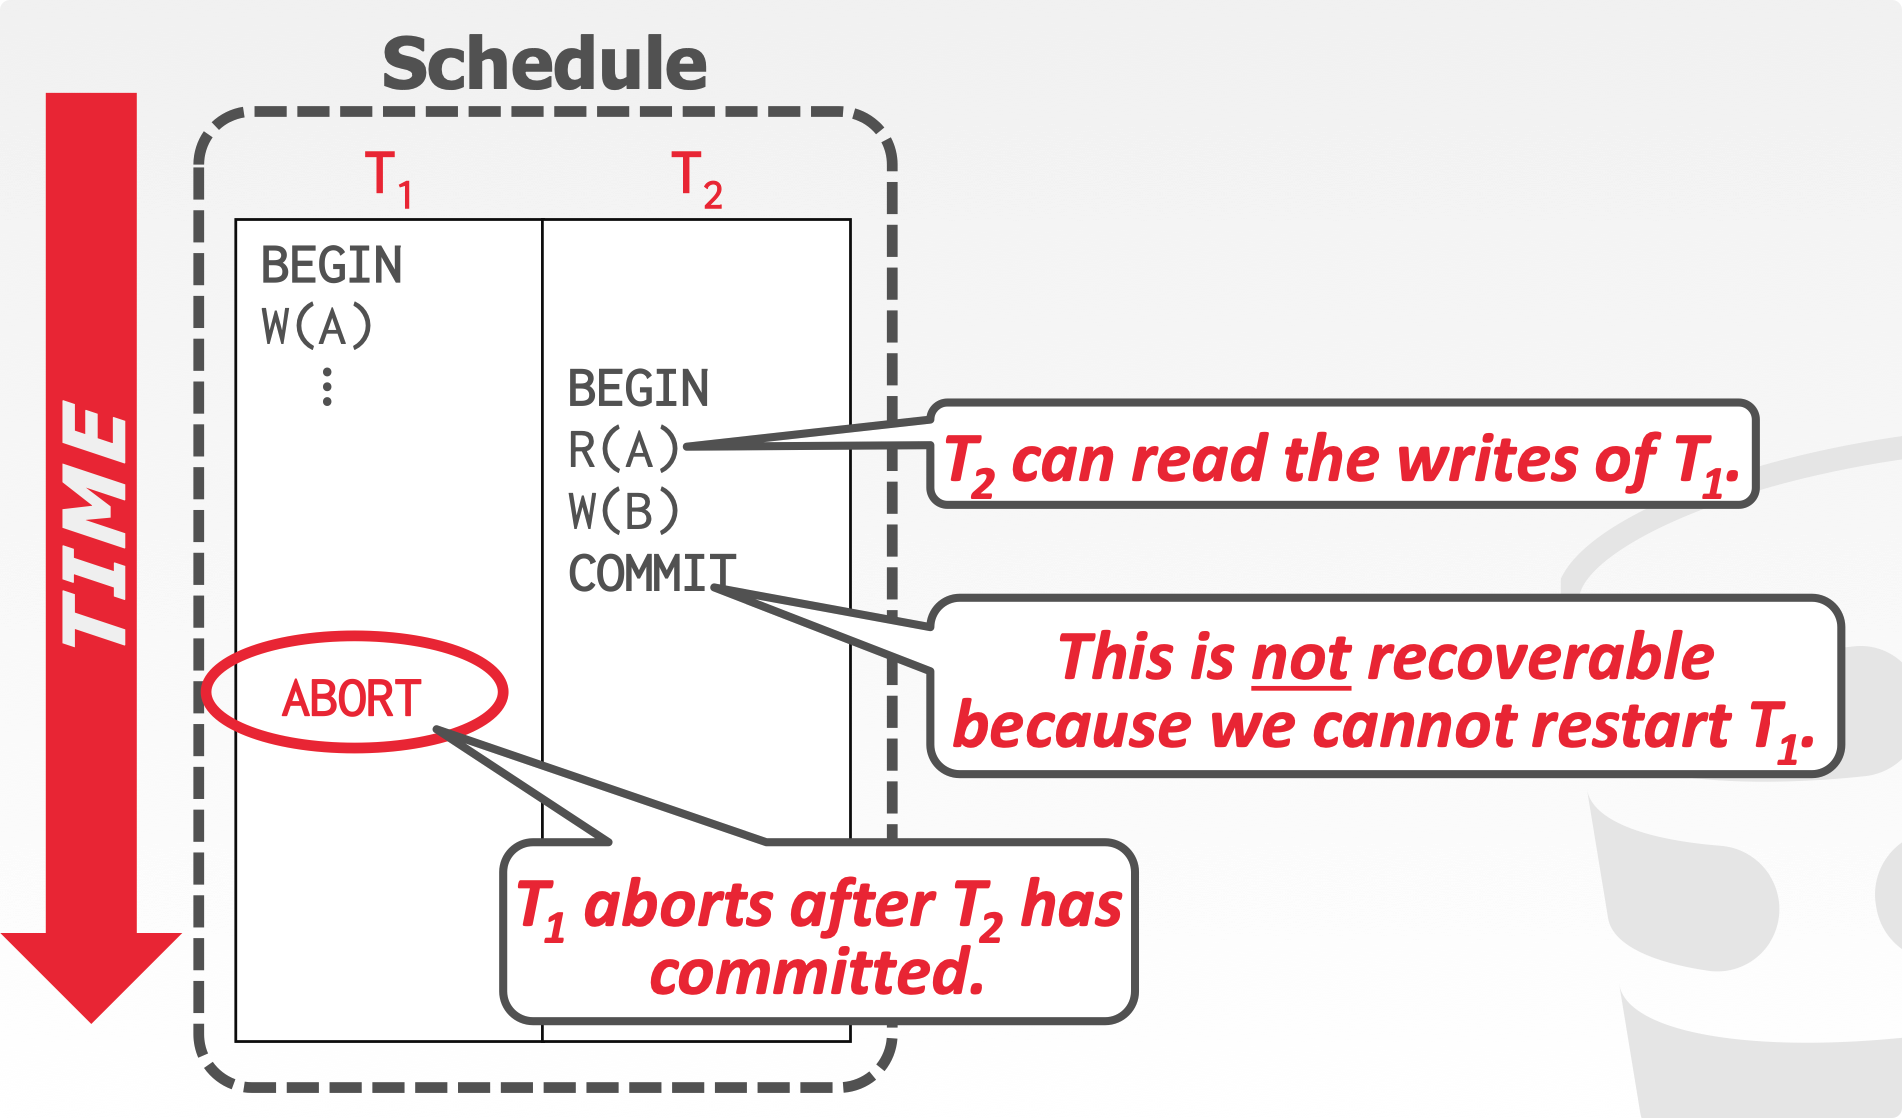 Basic T/O unrecoverable schedule